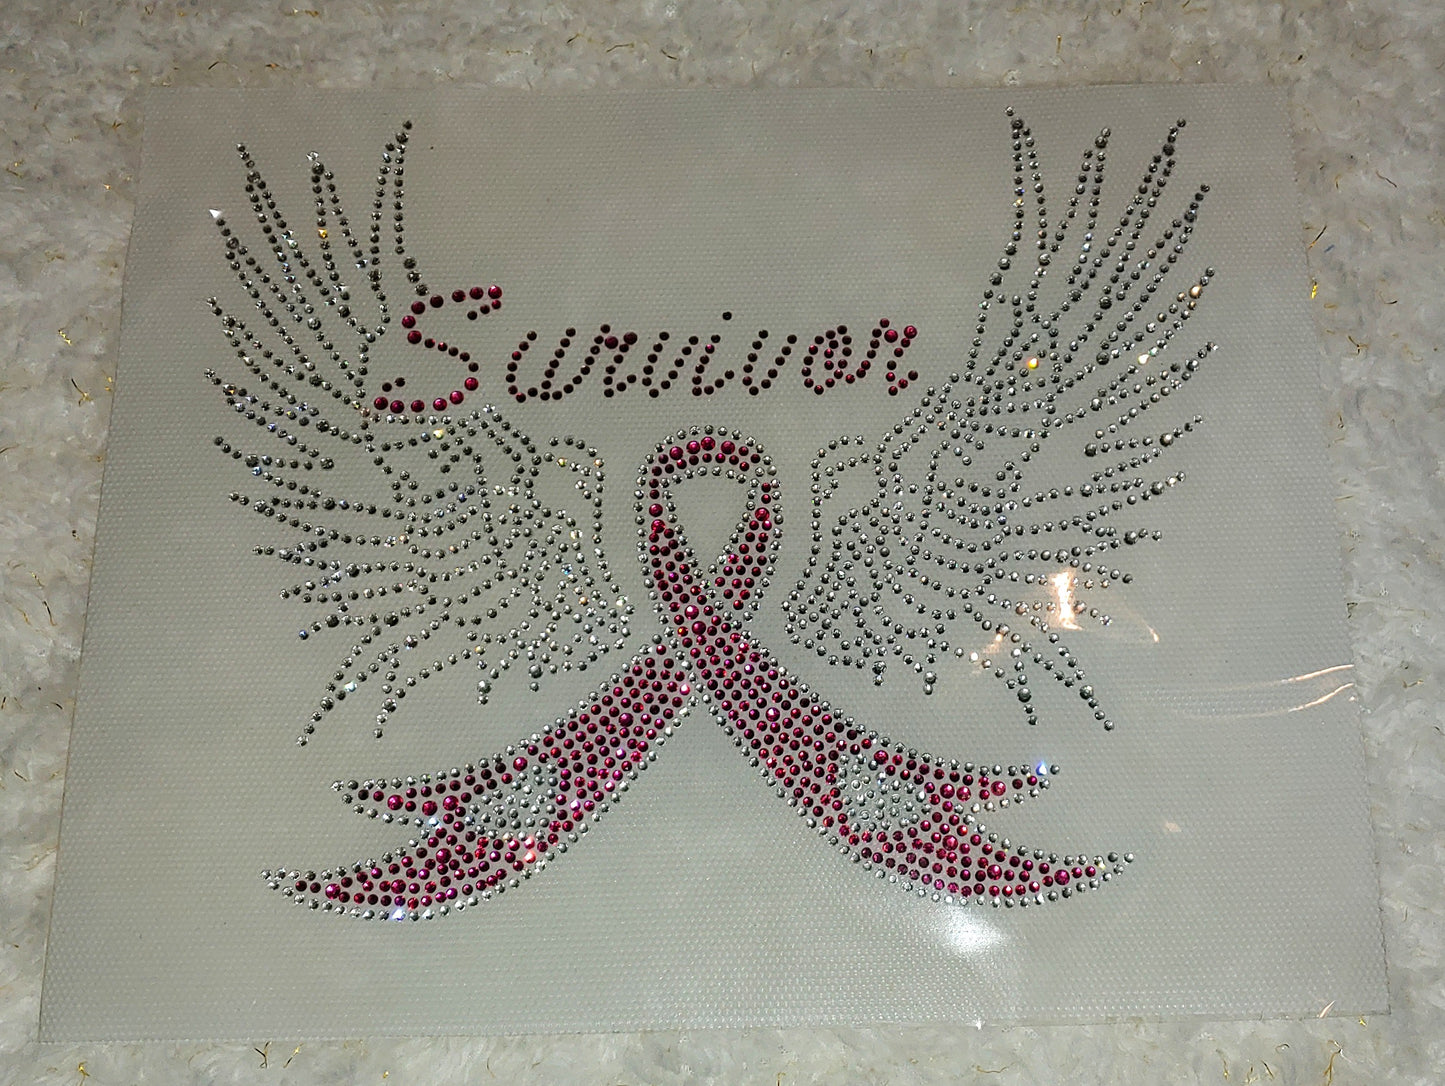 Survivor with Wings Breast Cancer Rhinestone Transfer Size 8" x 6.5"